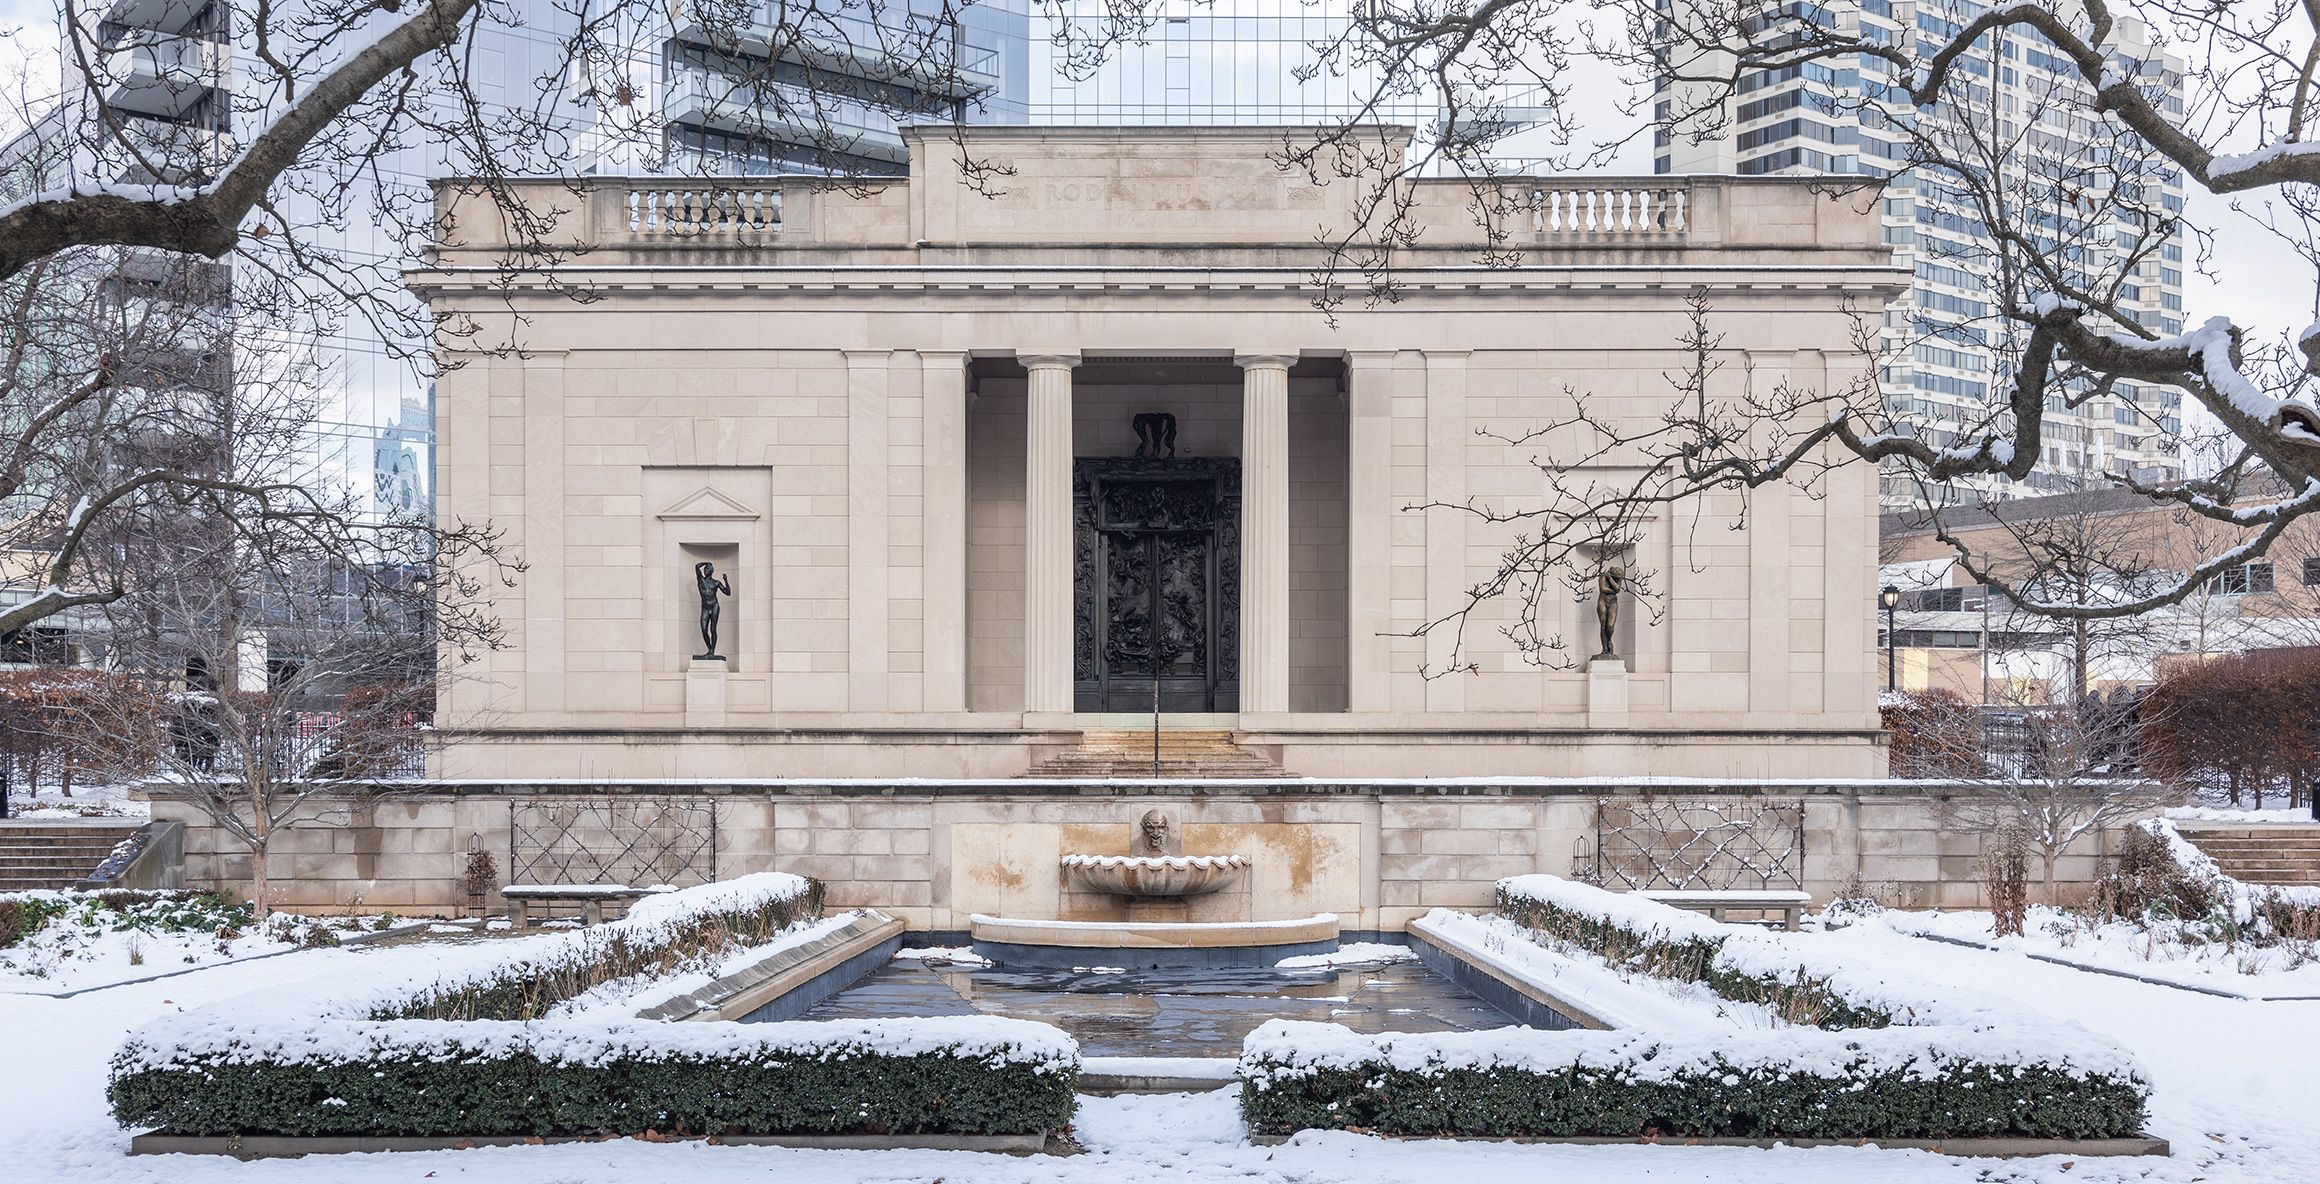 Photo of the exterior of the Rodin Museum in the snow.